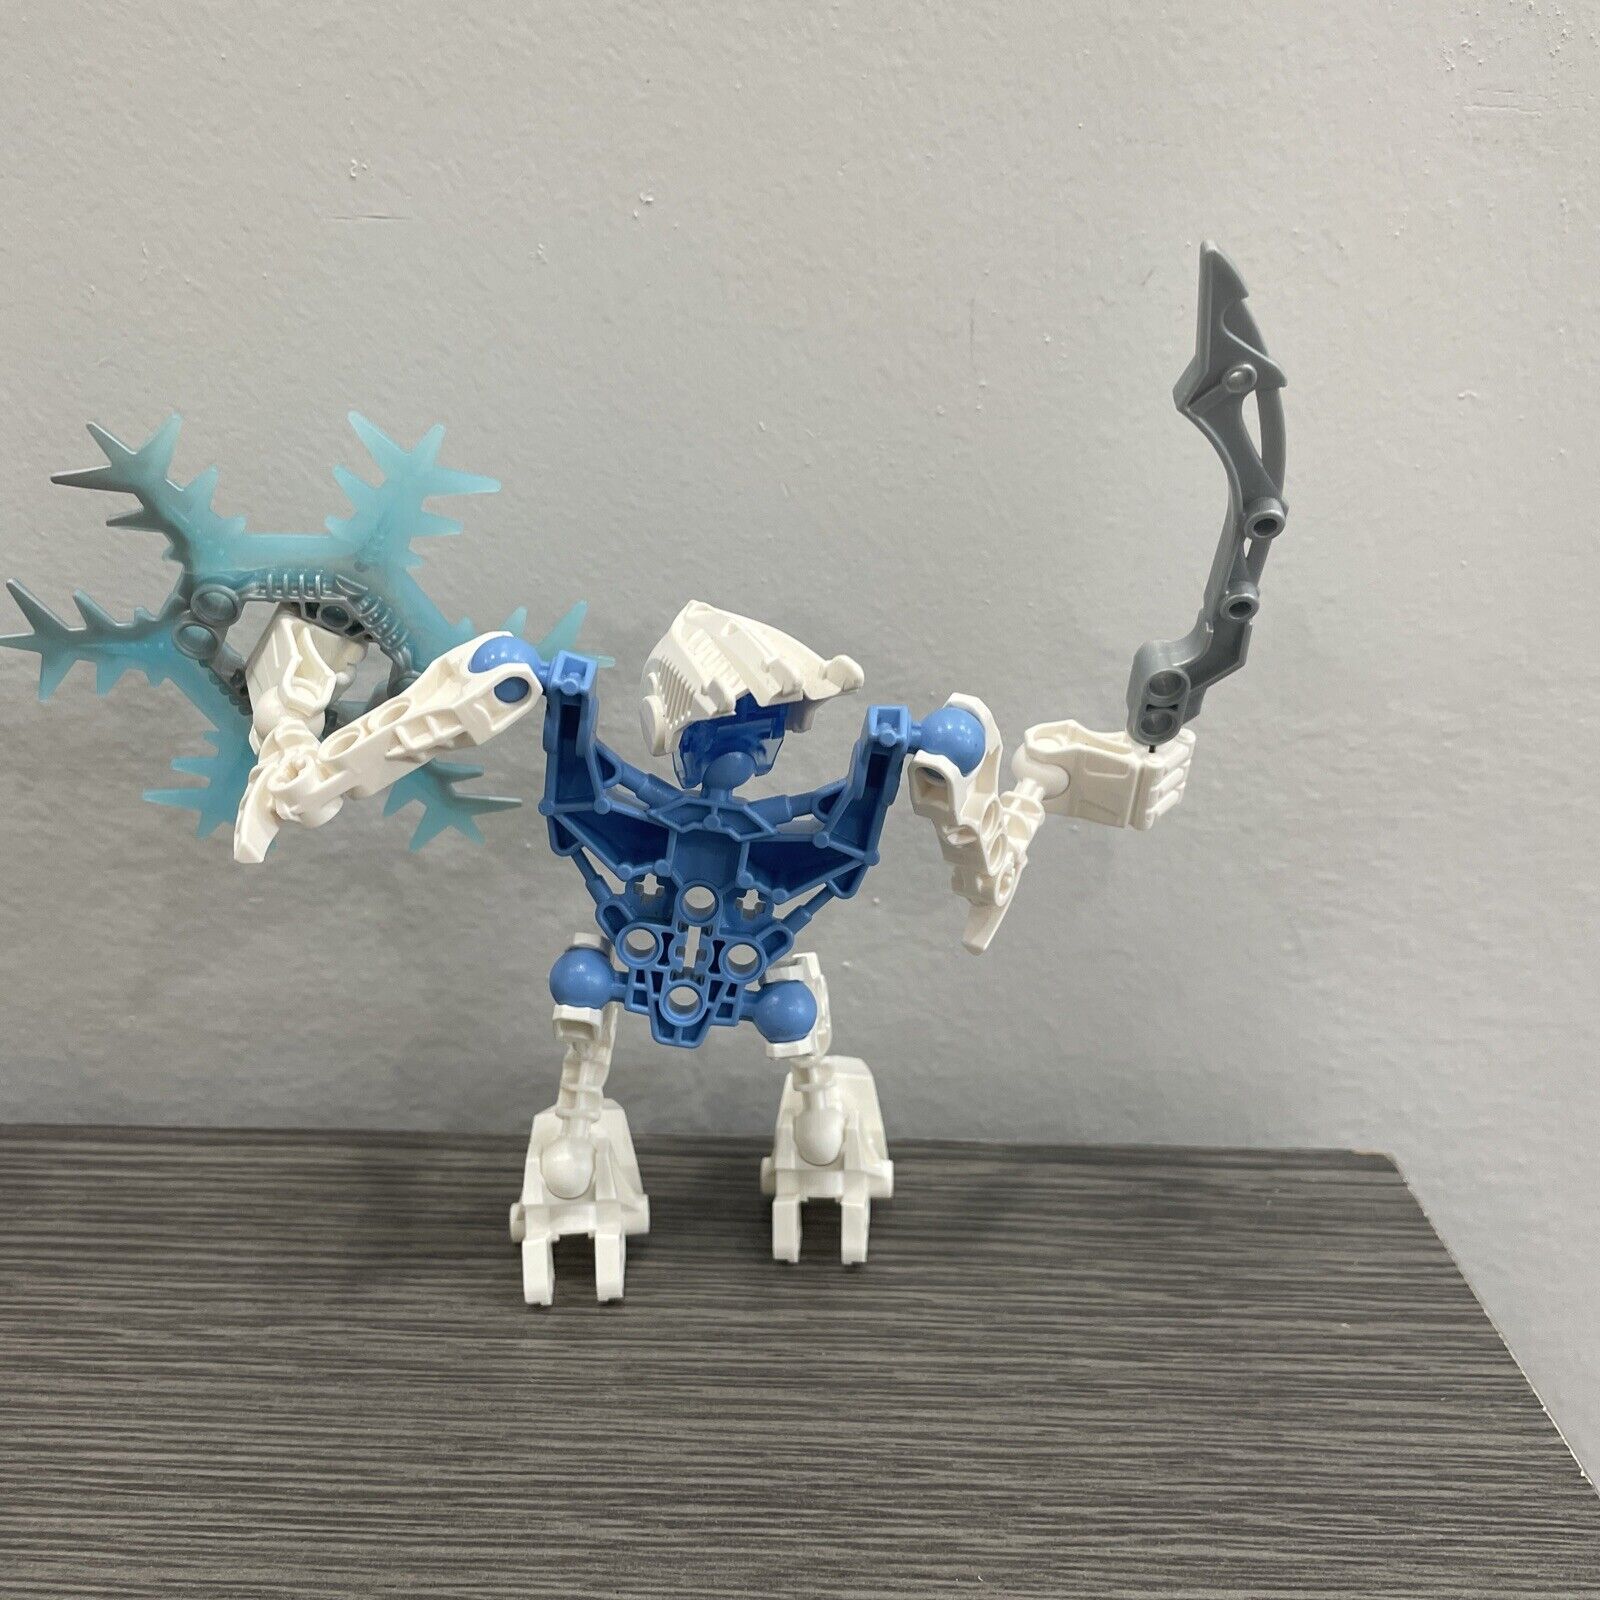 Lego Bionicle Metus (8976) 2009 - Complete Pieces - No Instructions, No Box